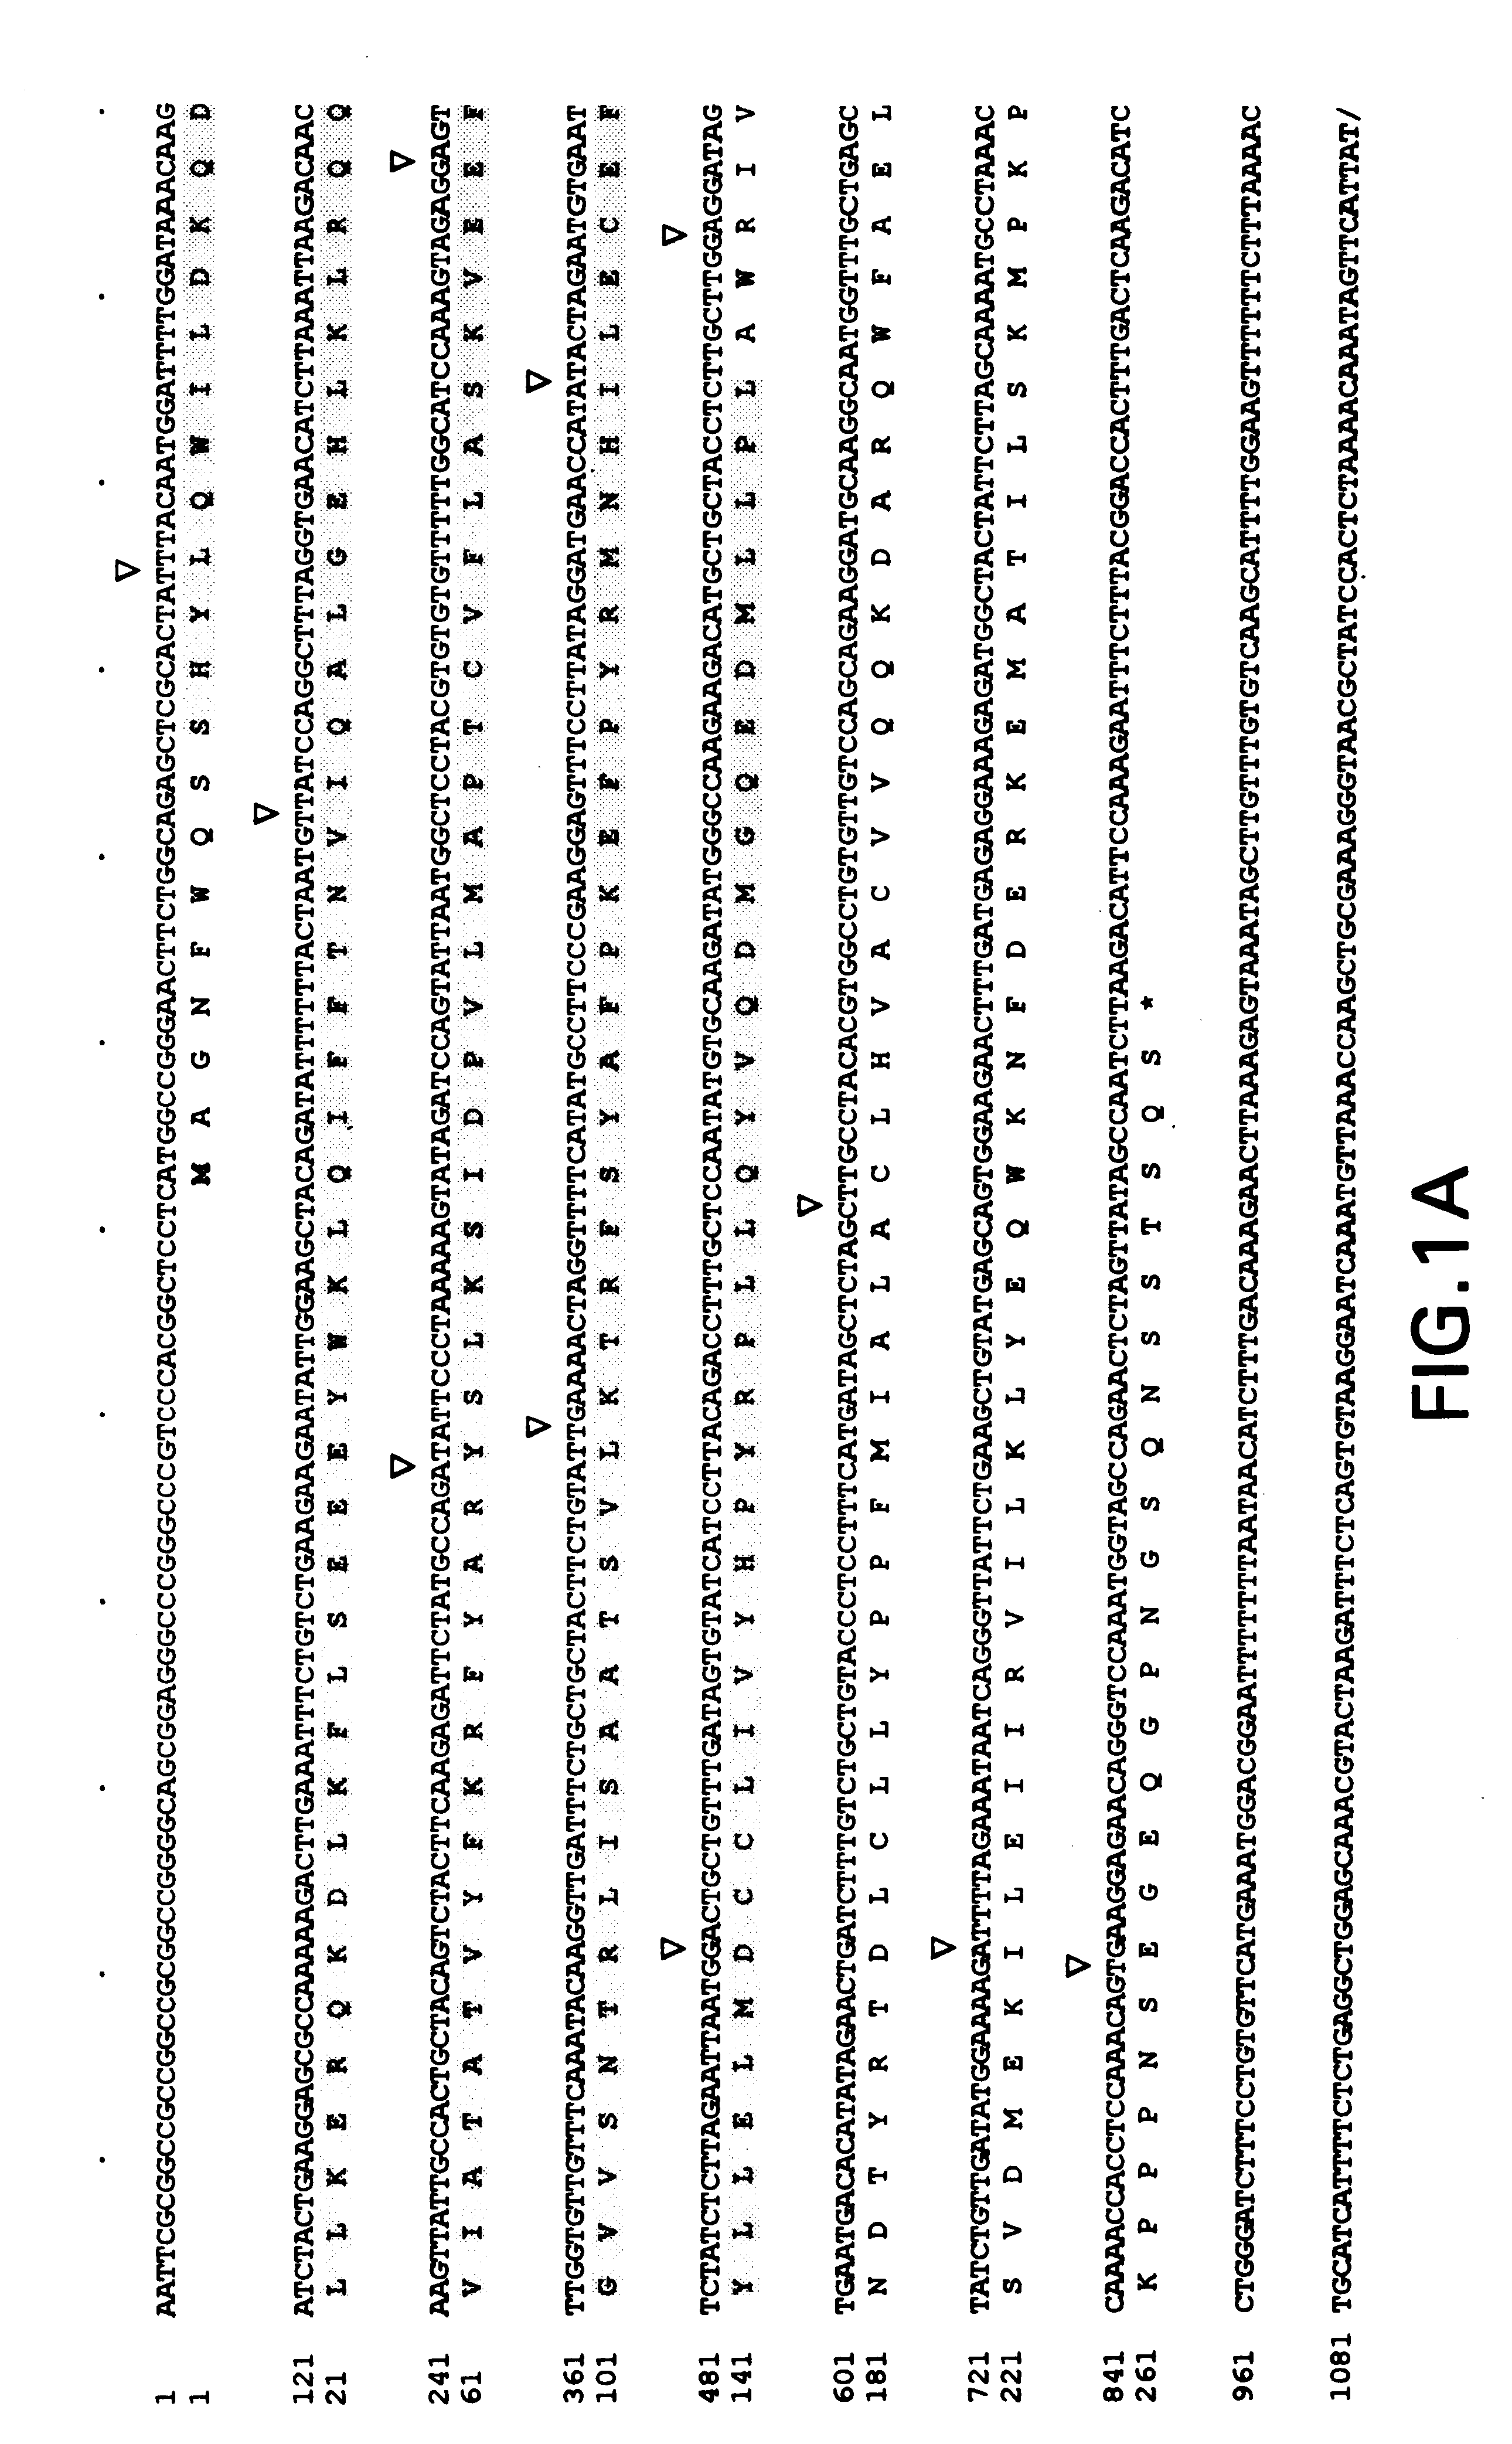 Cyclin-C variants, and diagnostic and therapeutic uses thereof